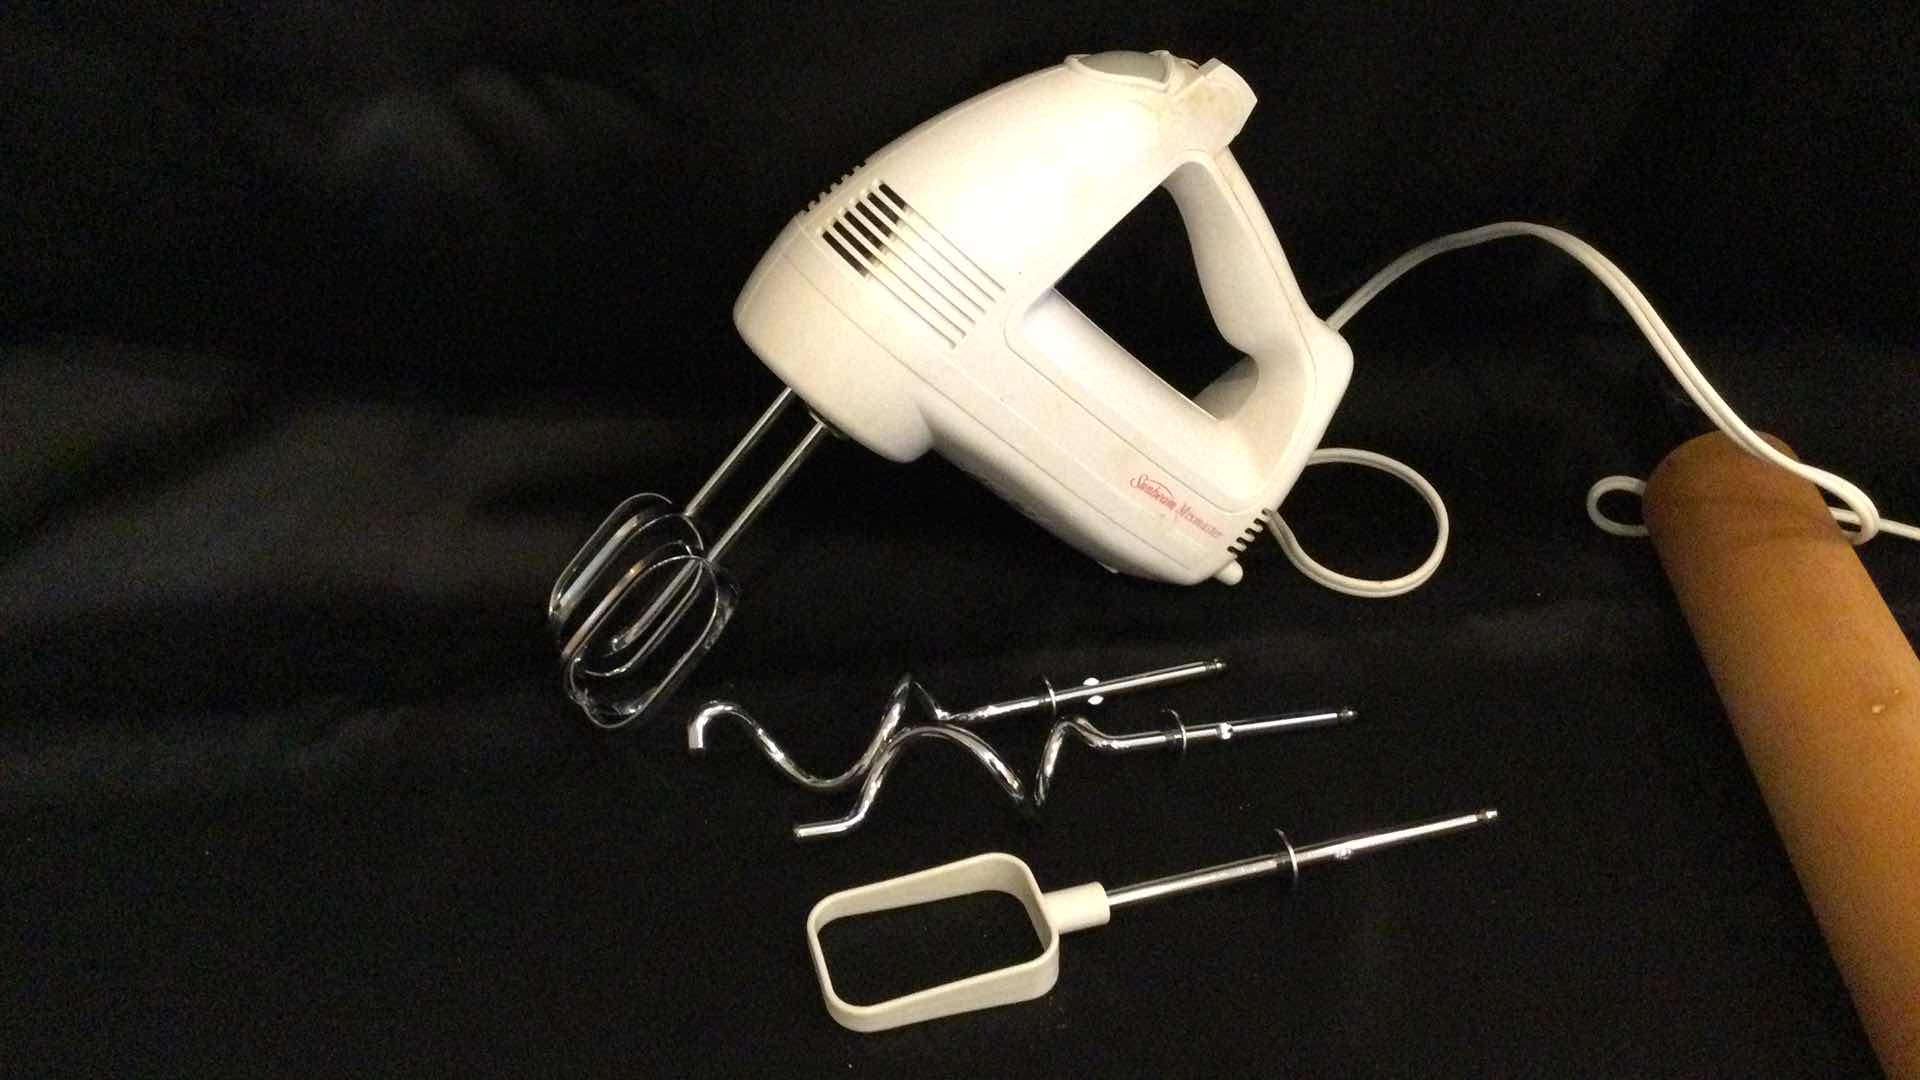 Photo 2 of SUNBEAM HAND MIXER W/ STAINLESS STEEL MIXING BOWLS & BAKING TOOLS